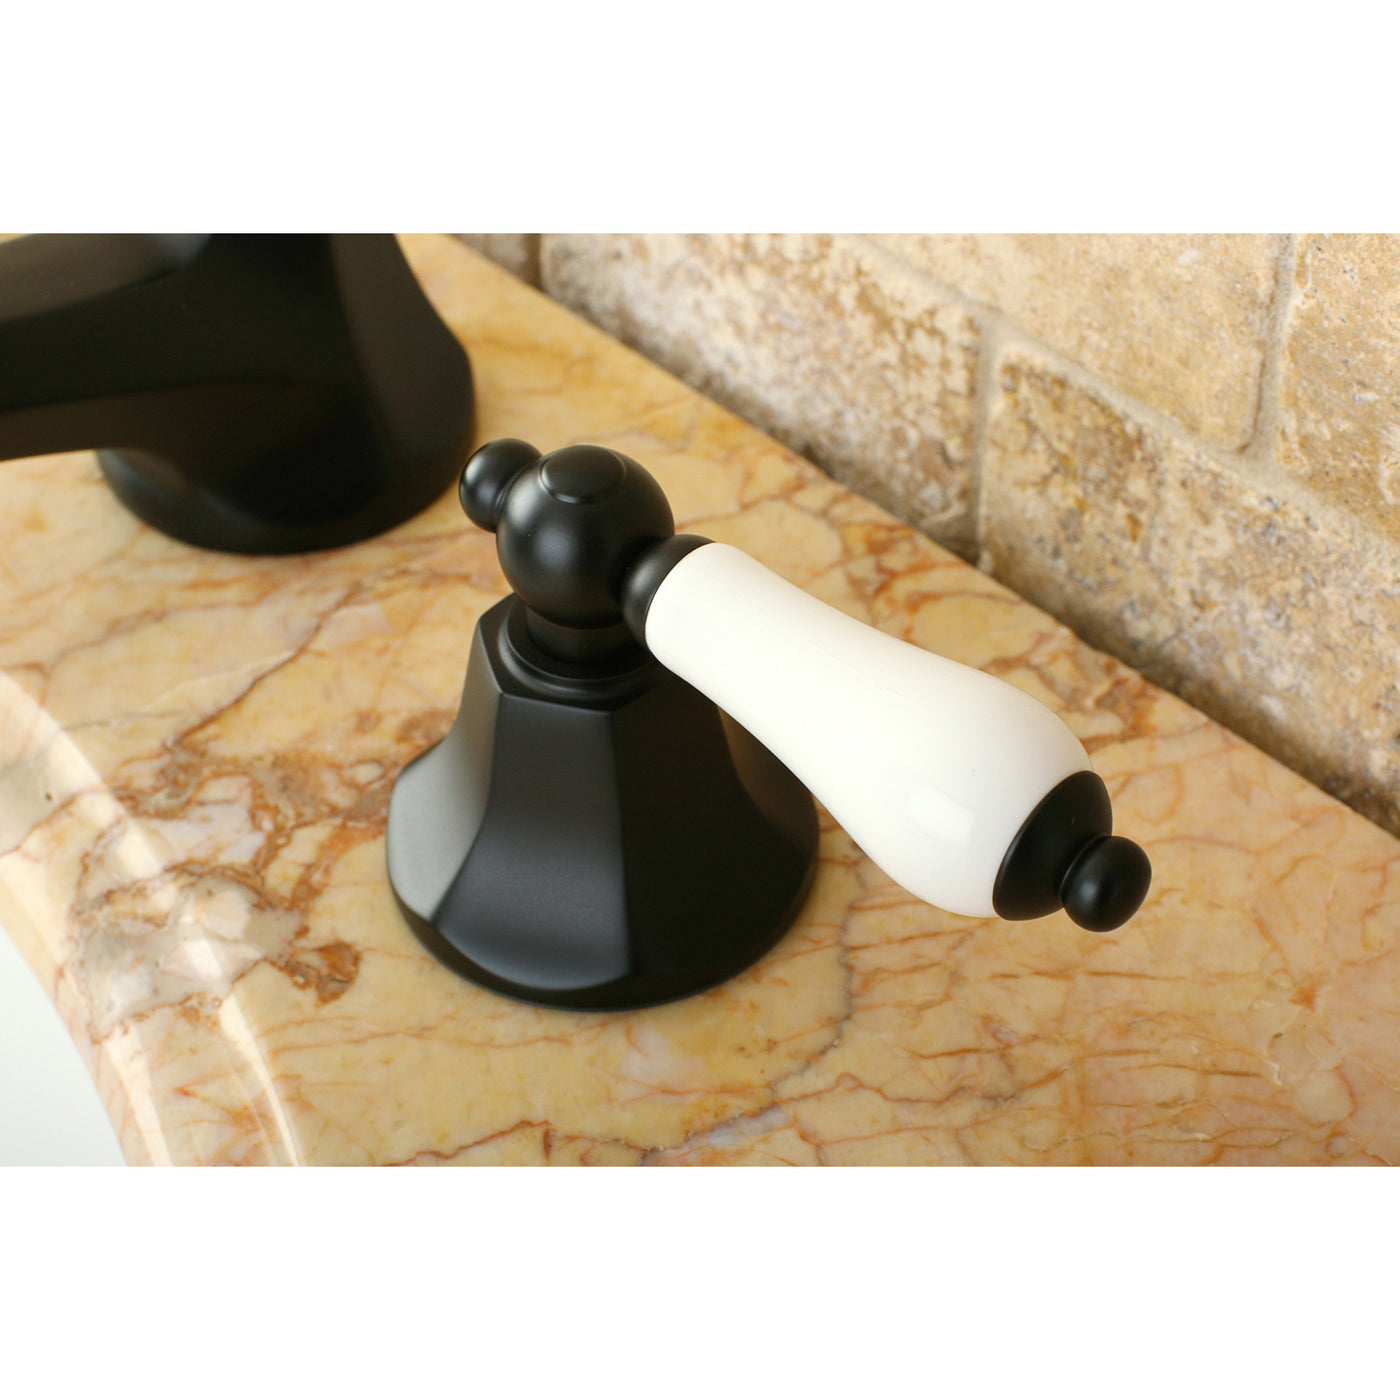 Elements of Design ES4465PL Widespread Bathroom Faucet with Brass Pop-Up, Oil Rubbed Bronze